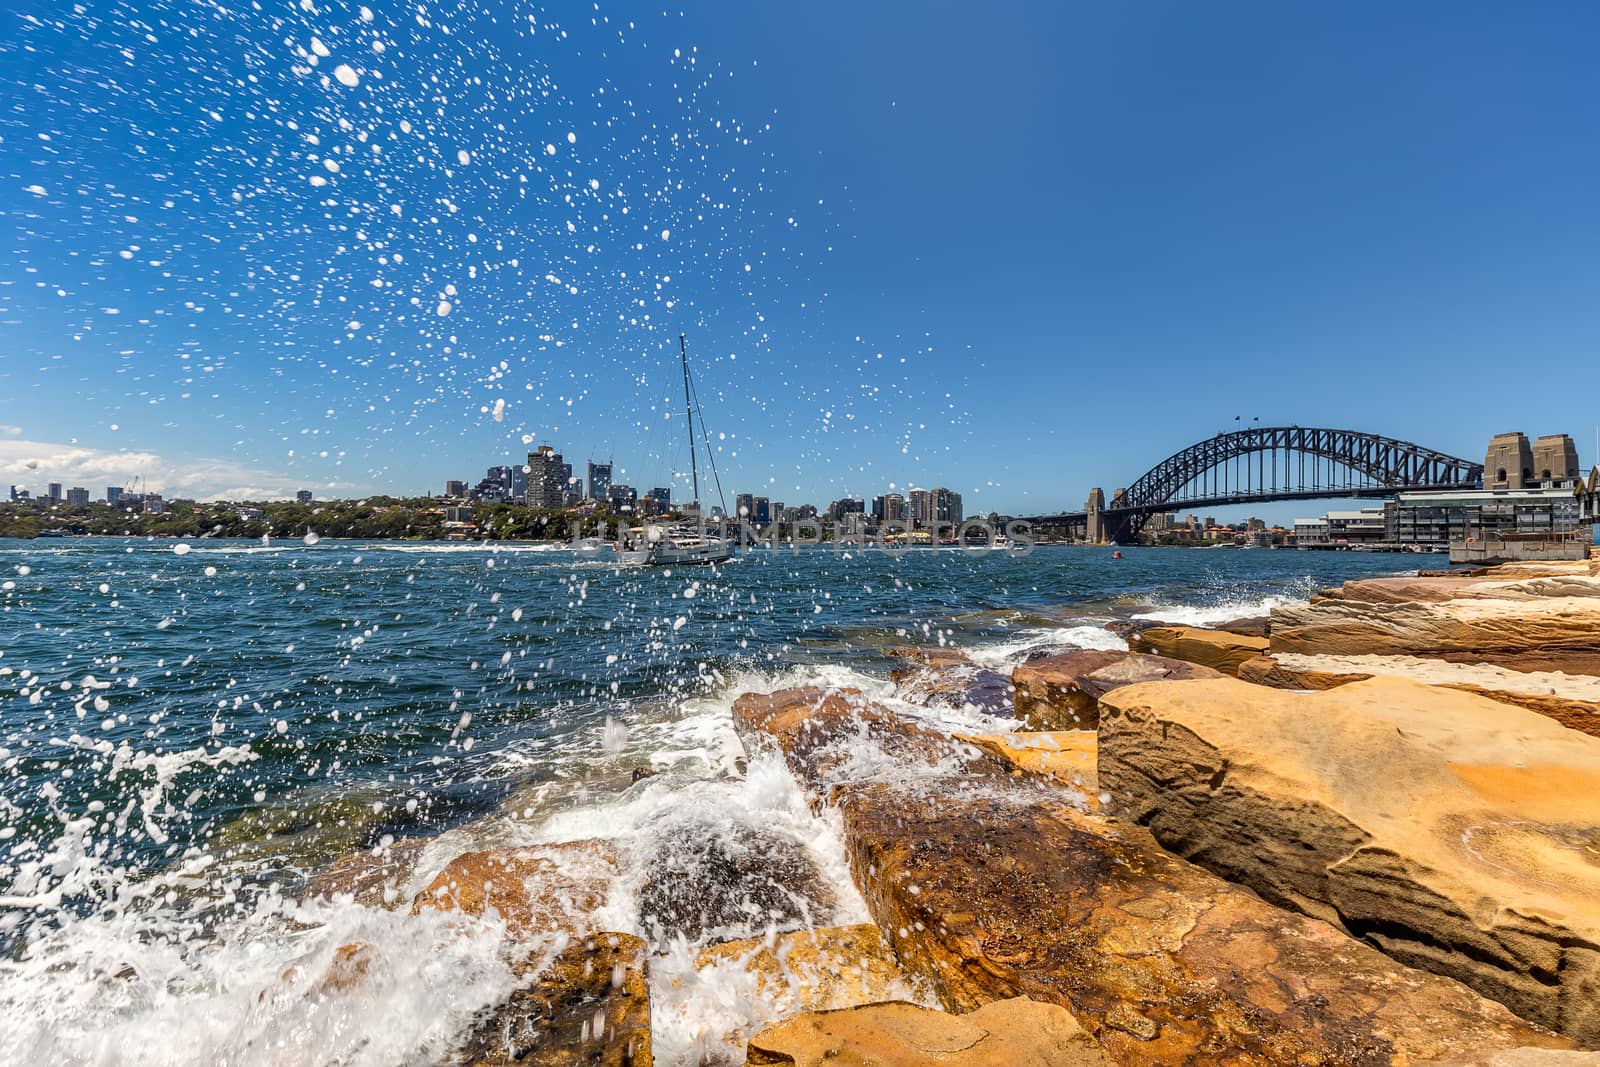 View of Harbor Bridge with a boat sailing in the distance and water splashing in the foreground in Sydney, Australia